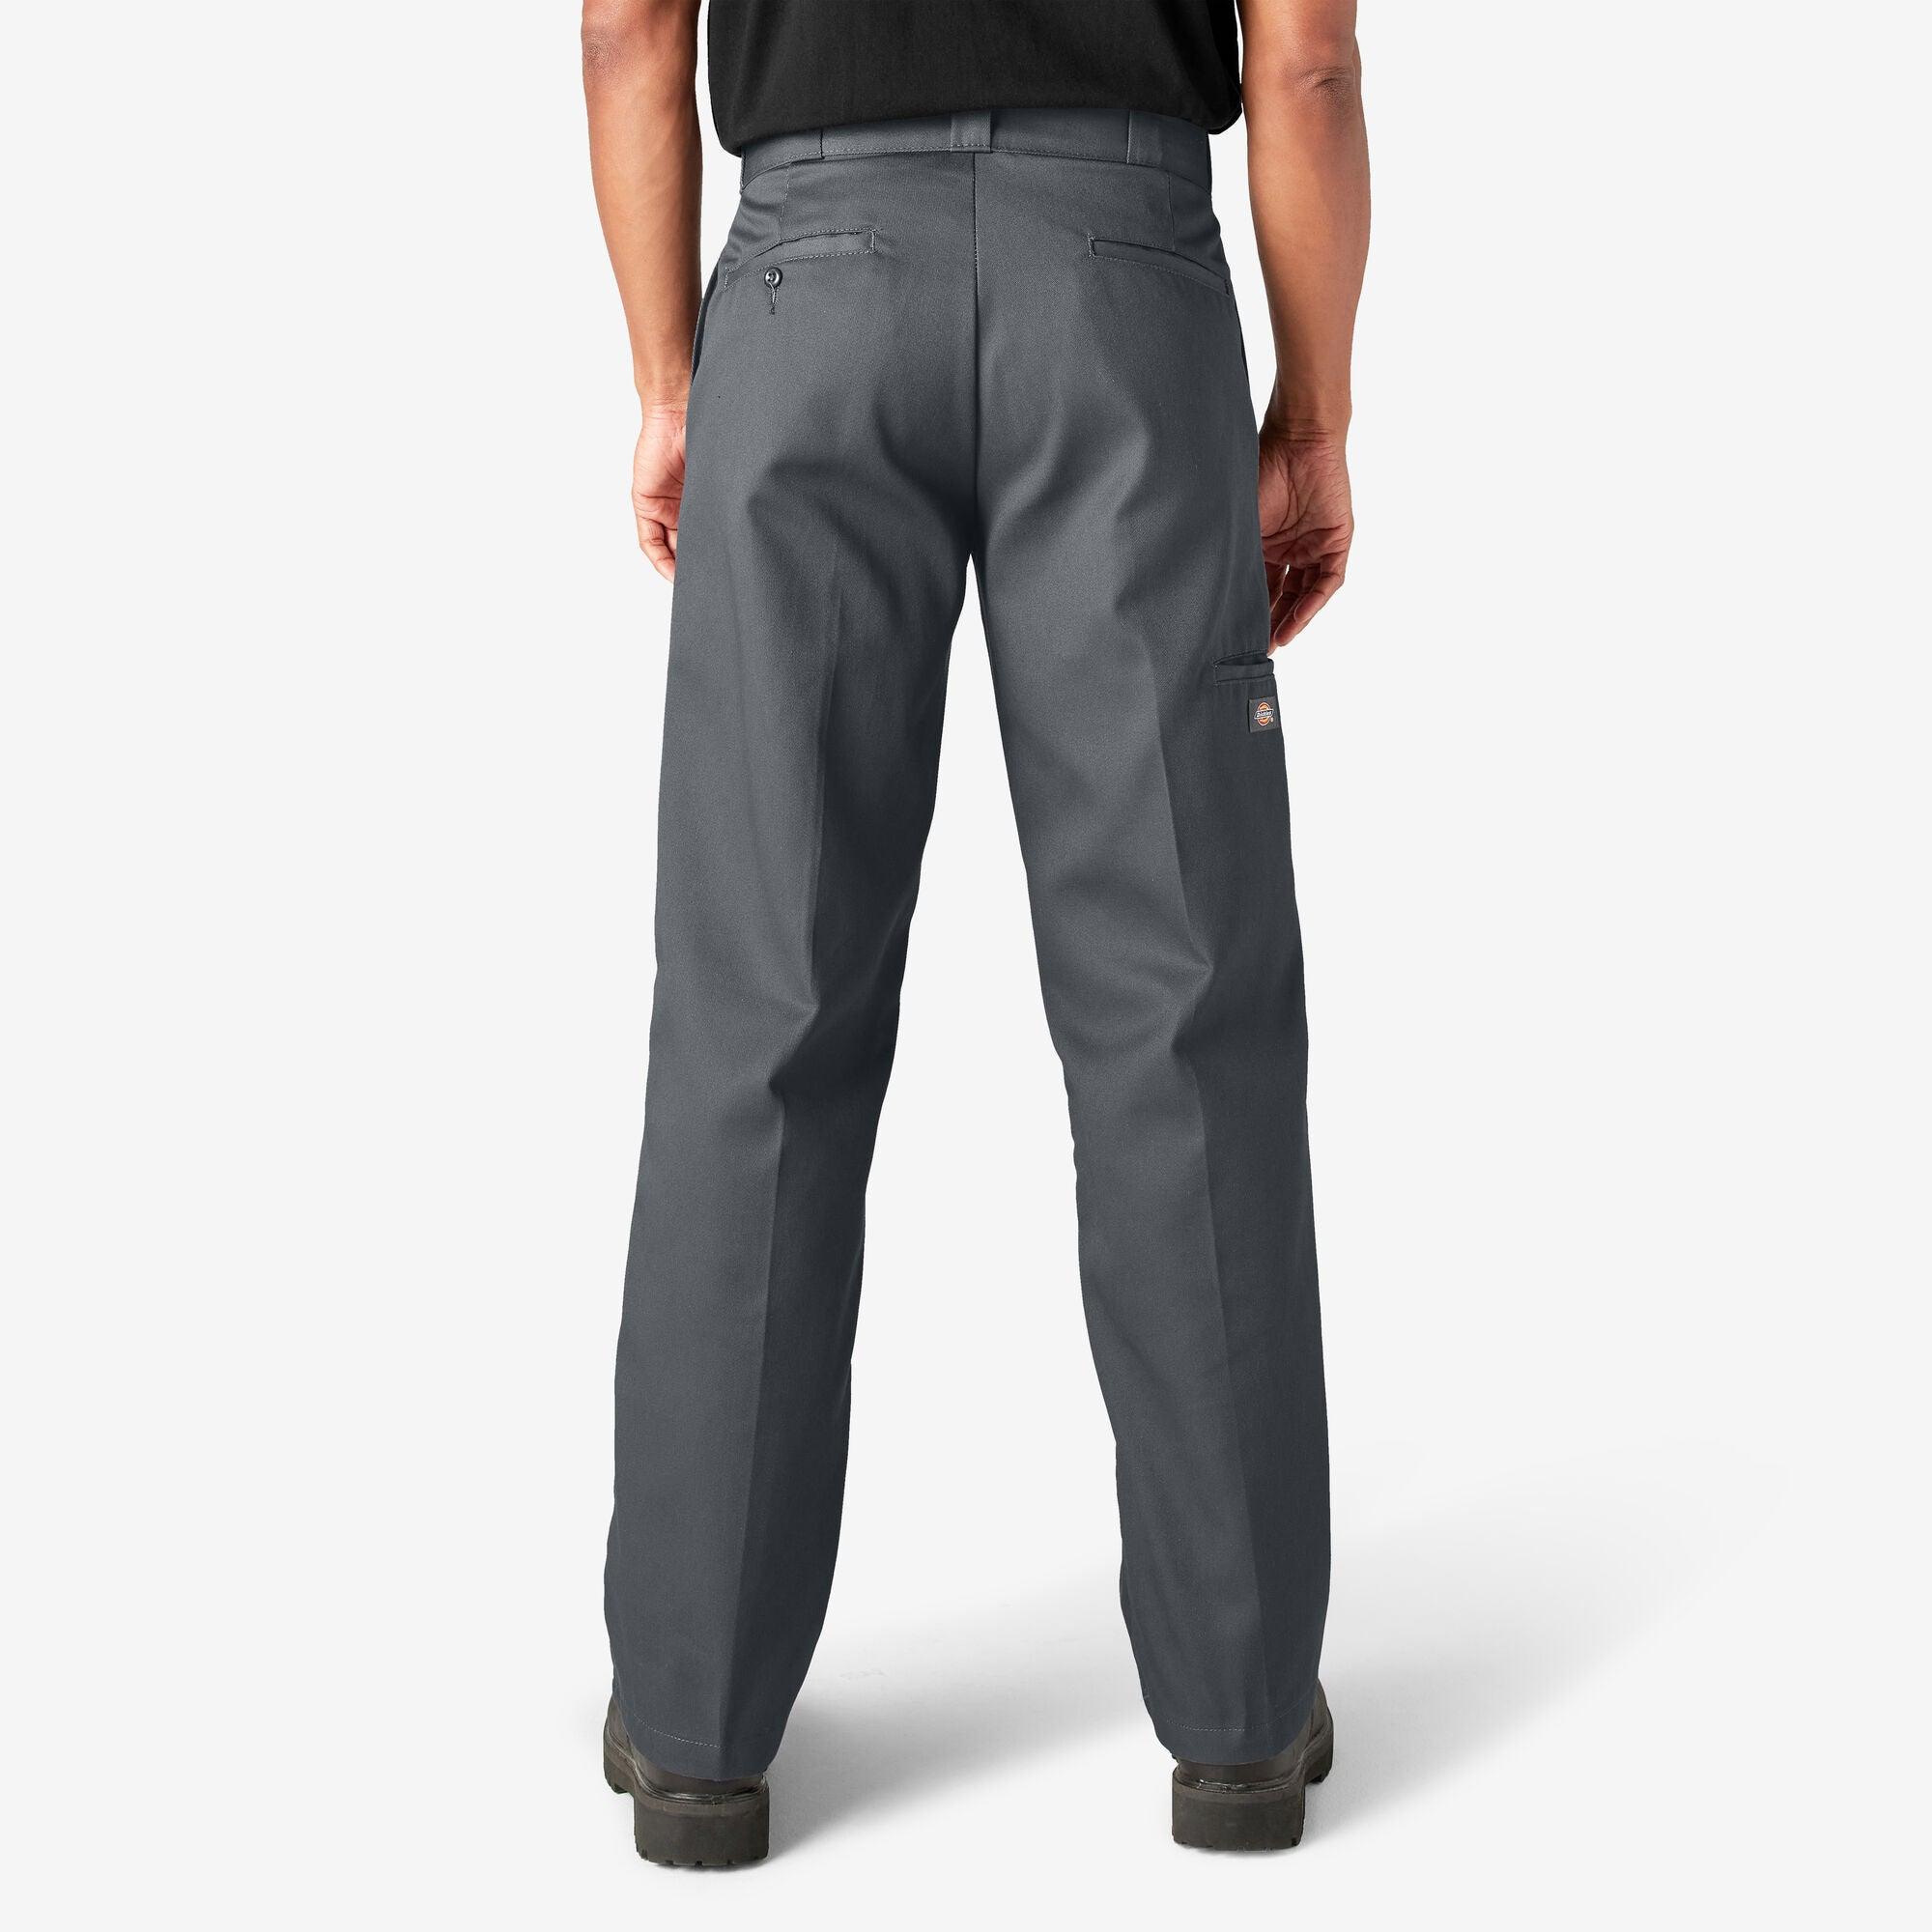 Review - Loose Fit Double Knee Work Pants, Charcoal Gray